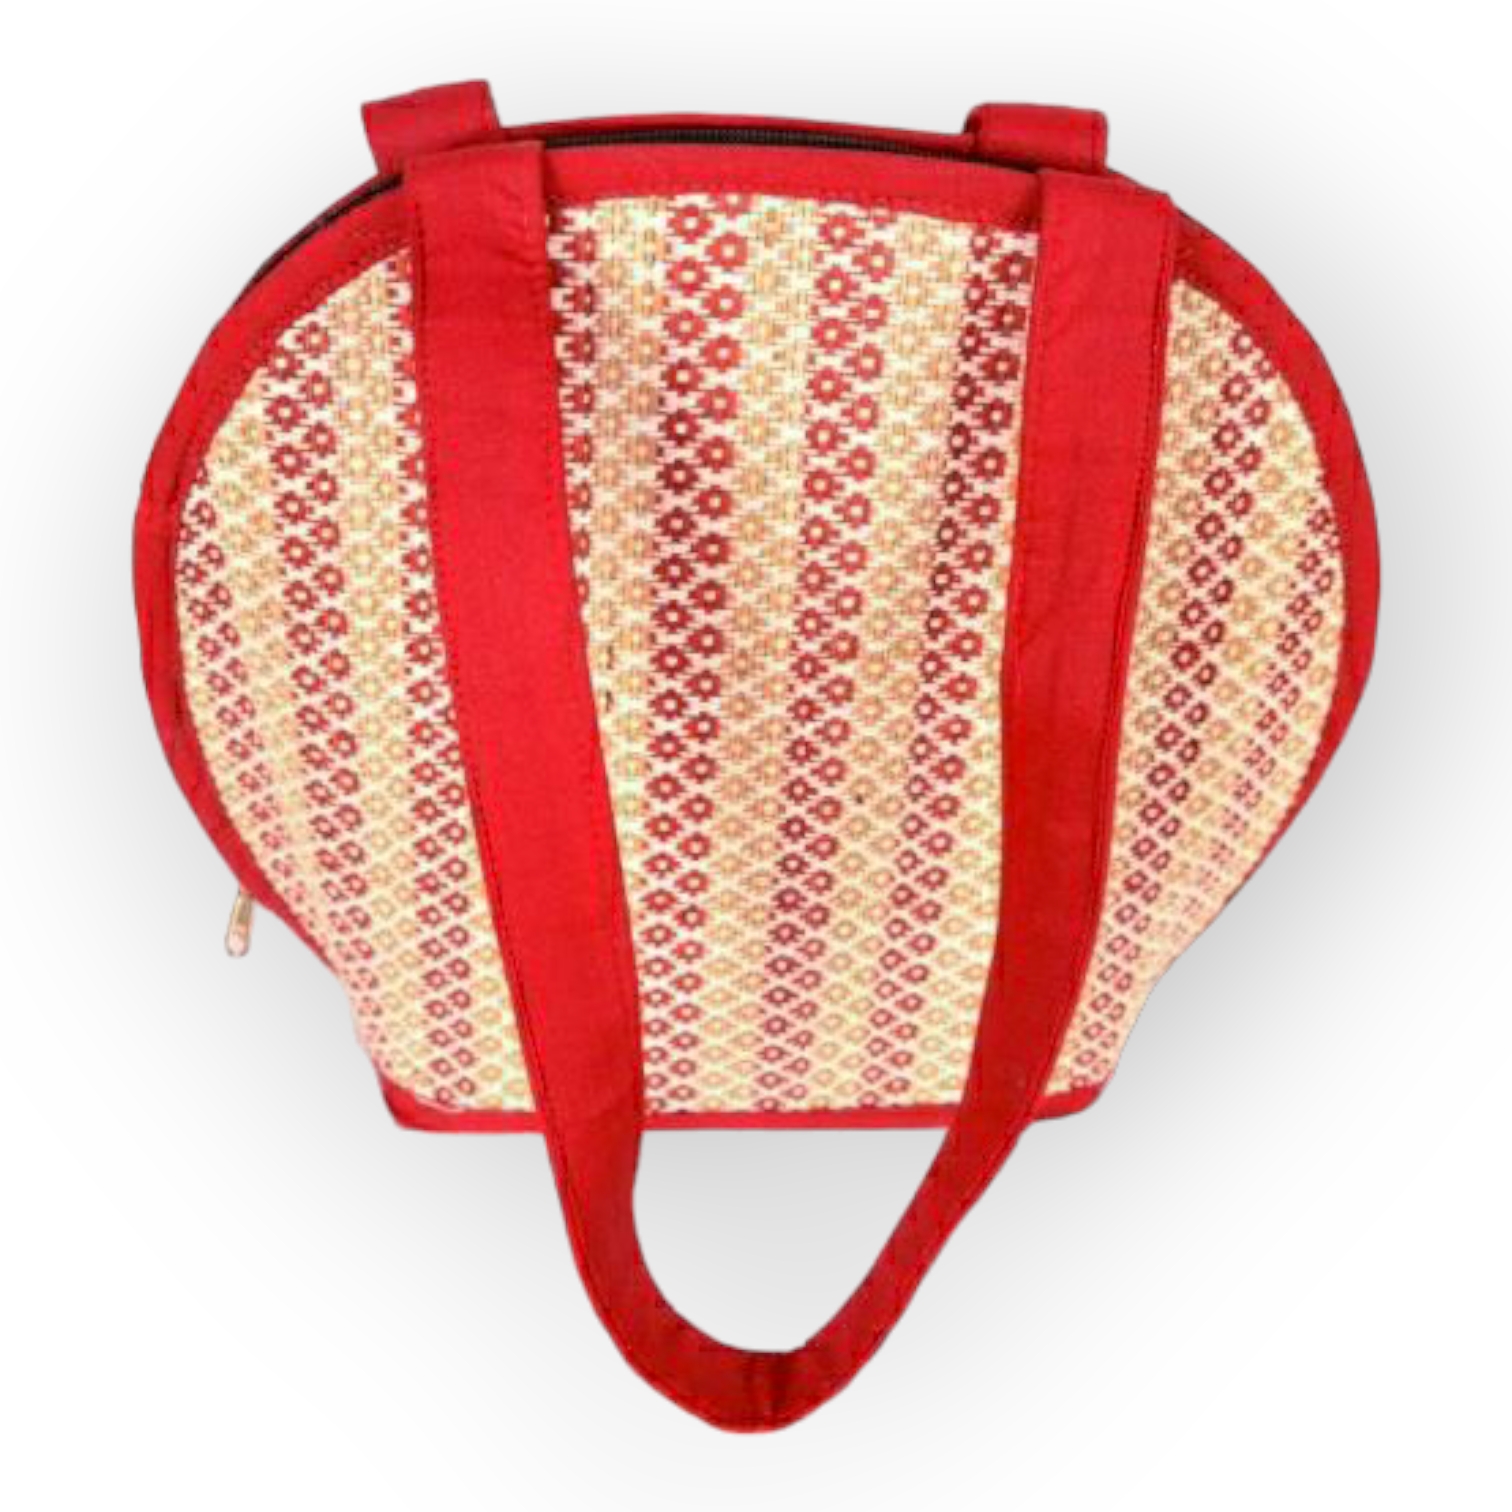 Madur Kathi Round Hand Bag in Red Colour